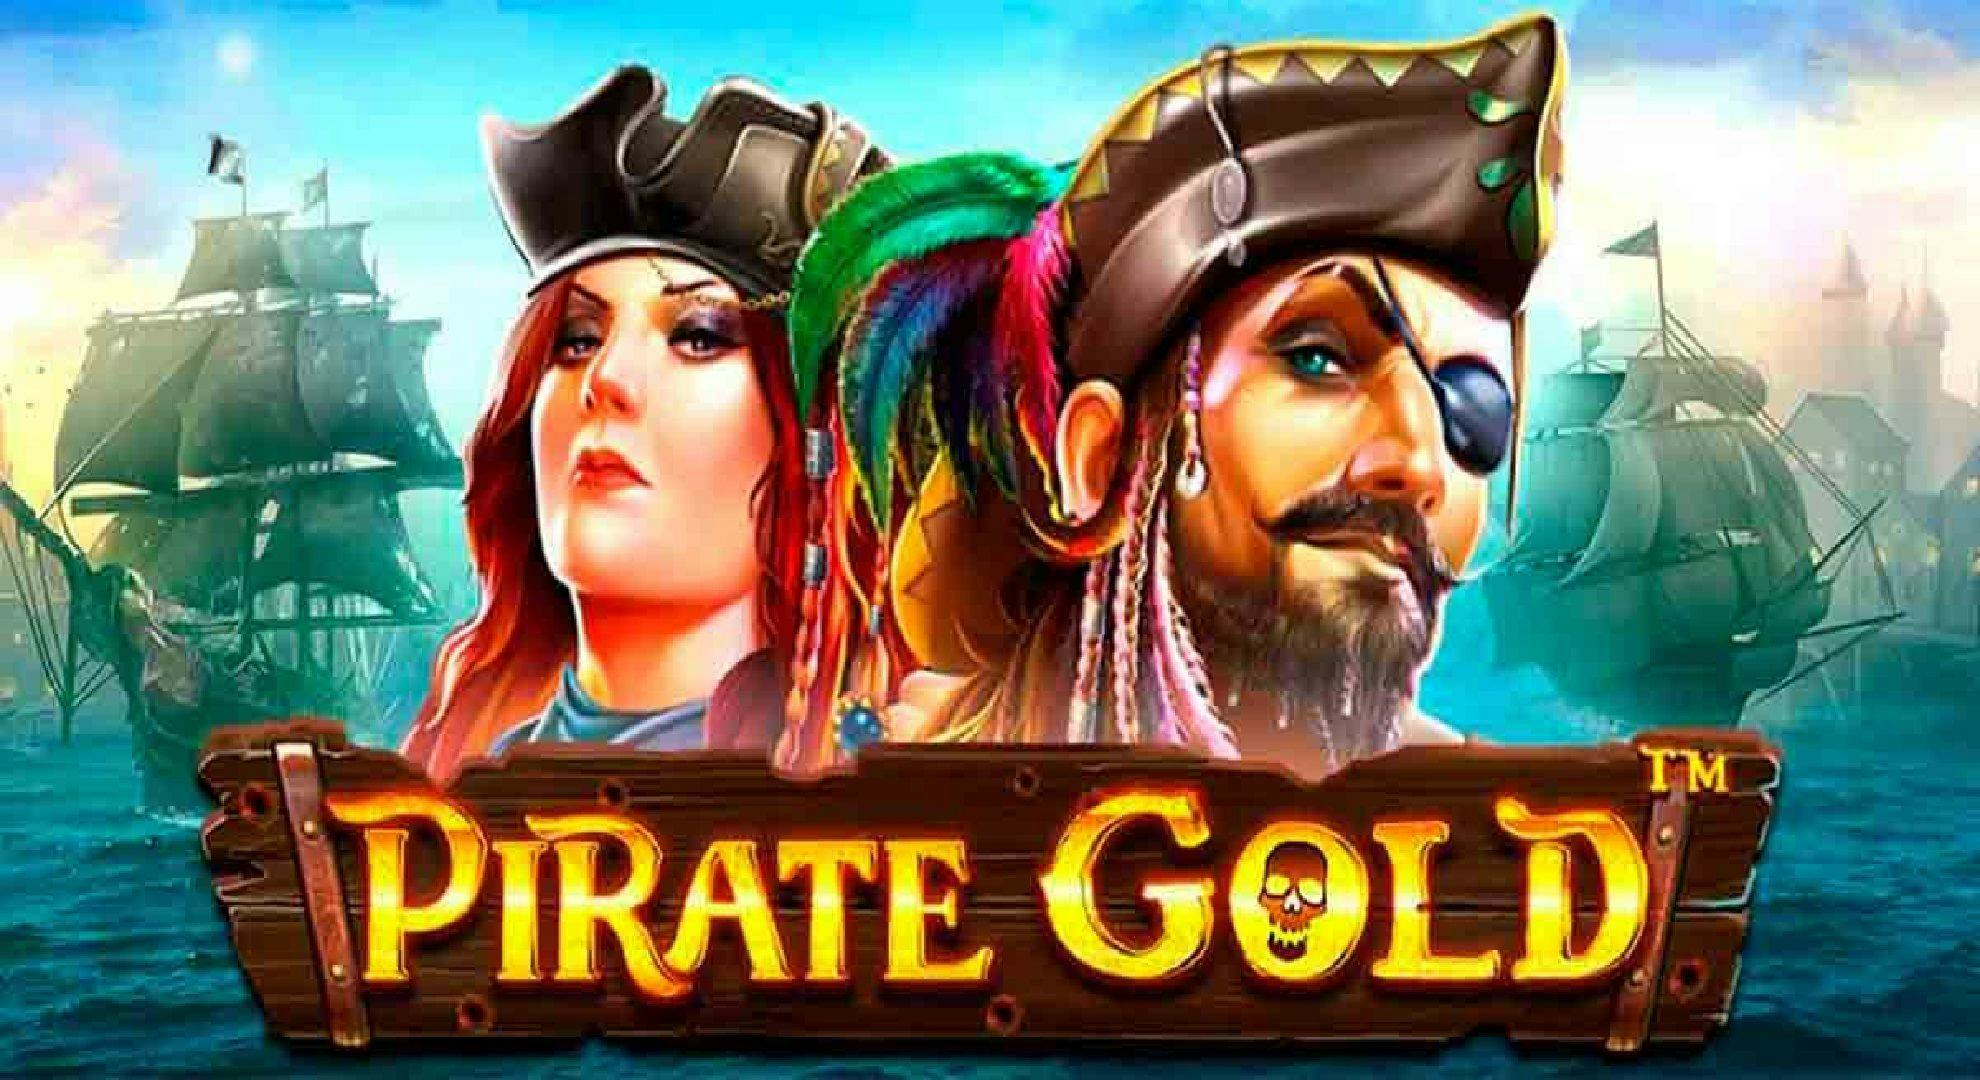 Pirate Gold Slot Online Free Play